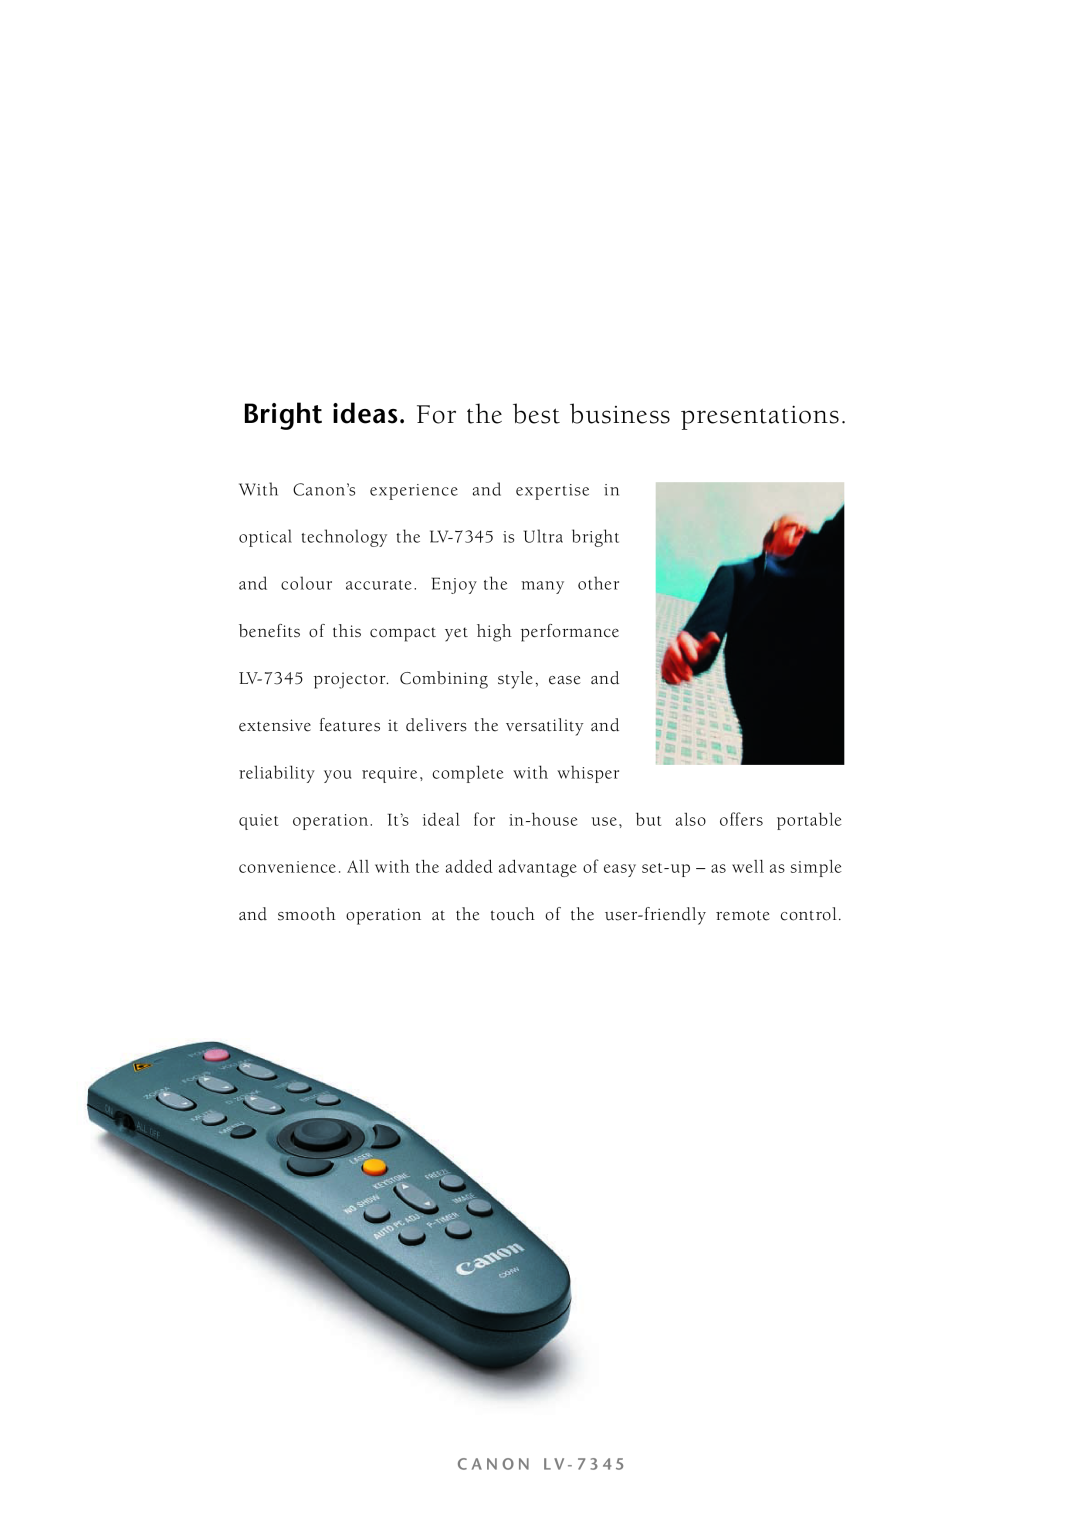 Canon LV-7345 manual Bright ideas. For the best business presentations 